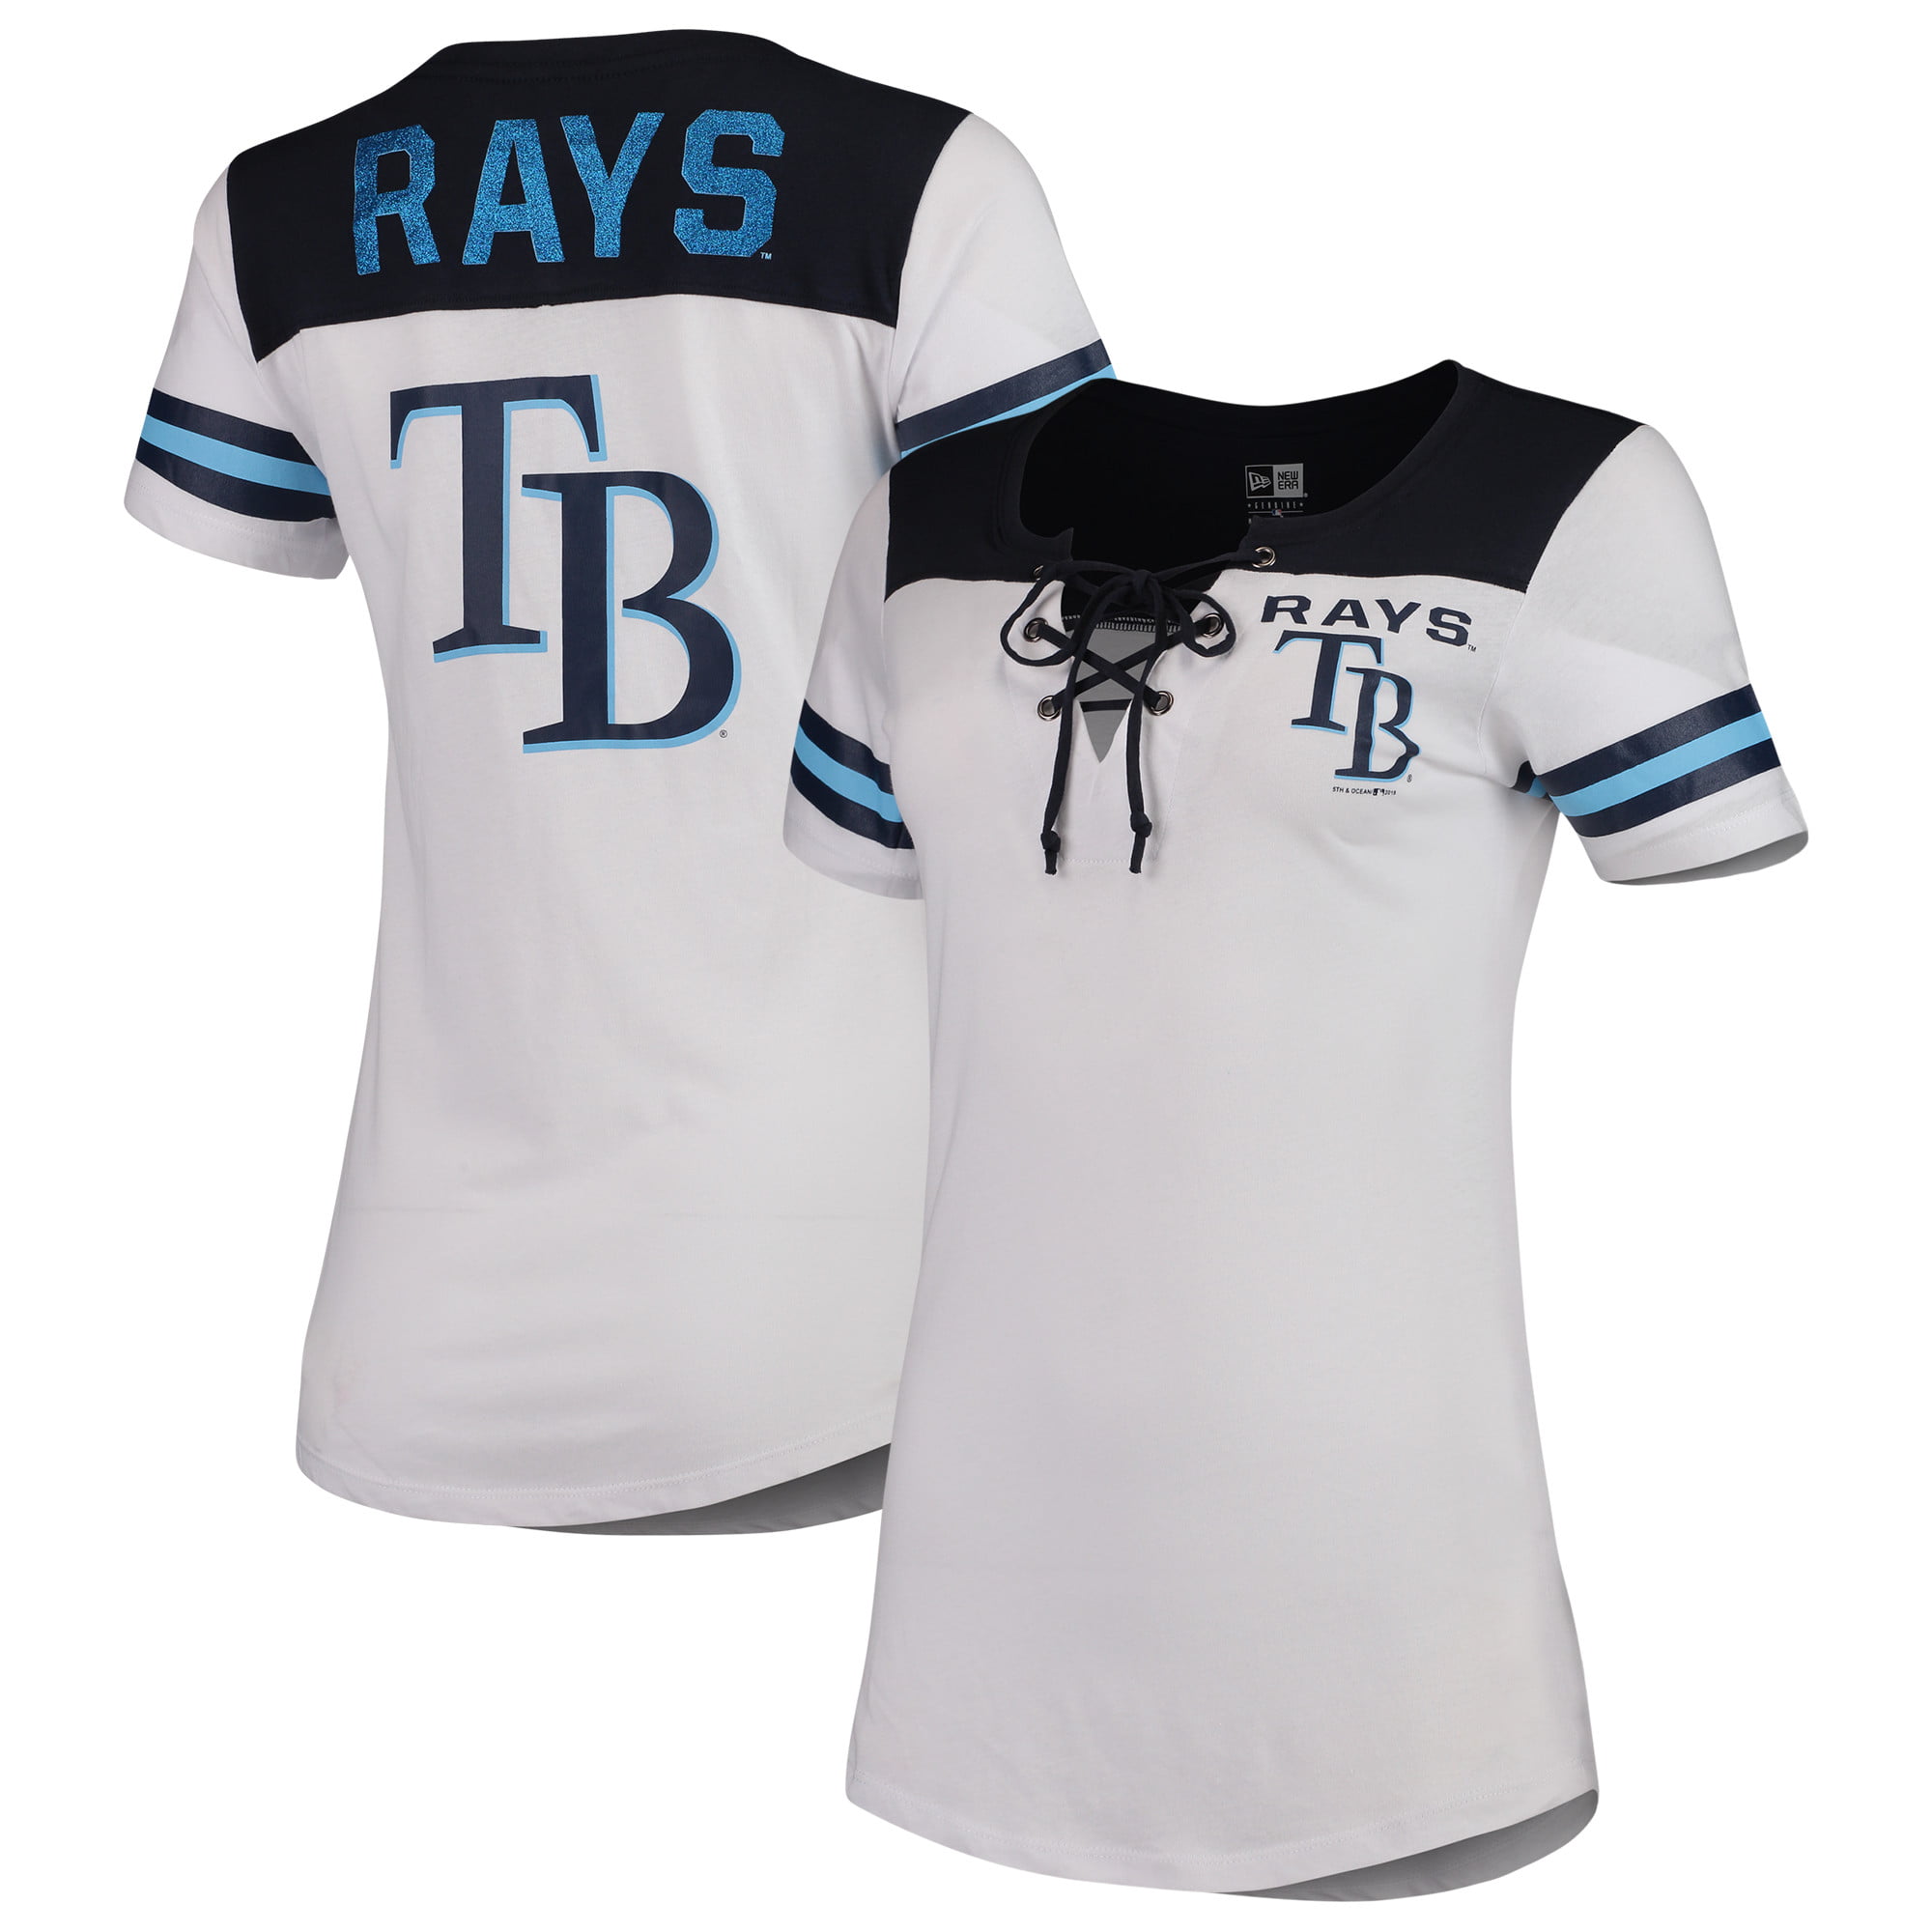 Tampa Bay Rays Baby Gear, Rays Baby Gear